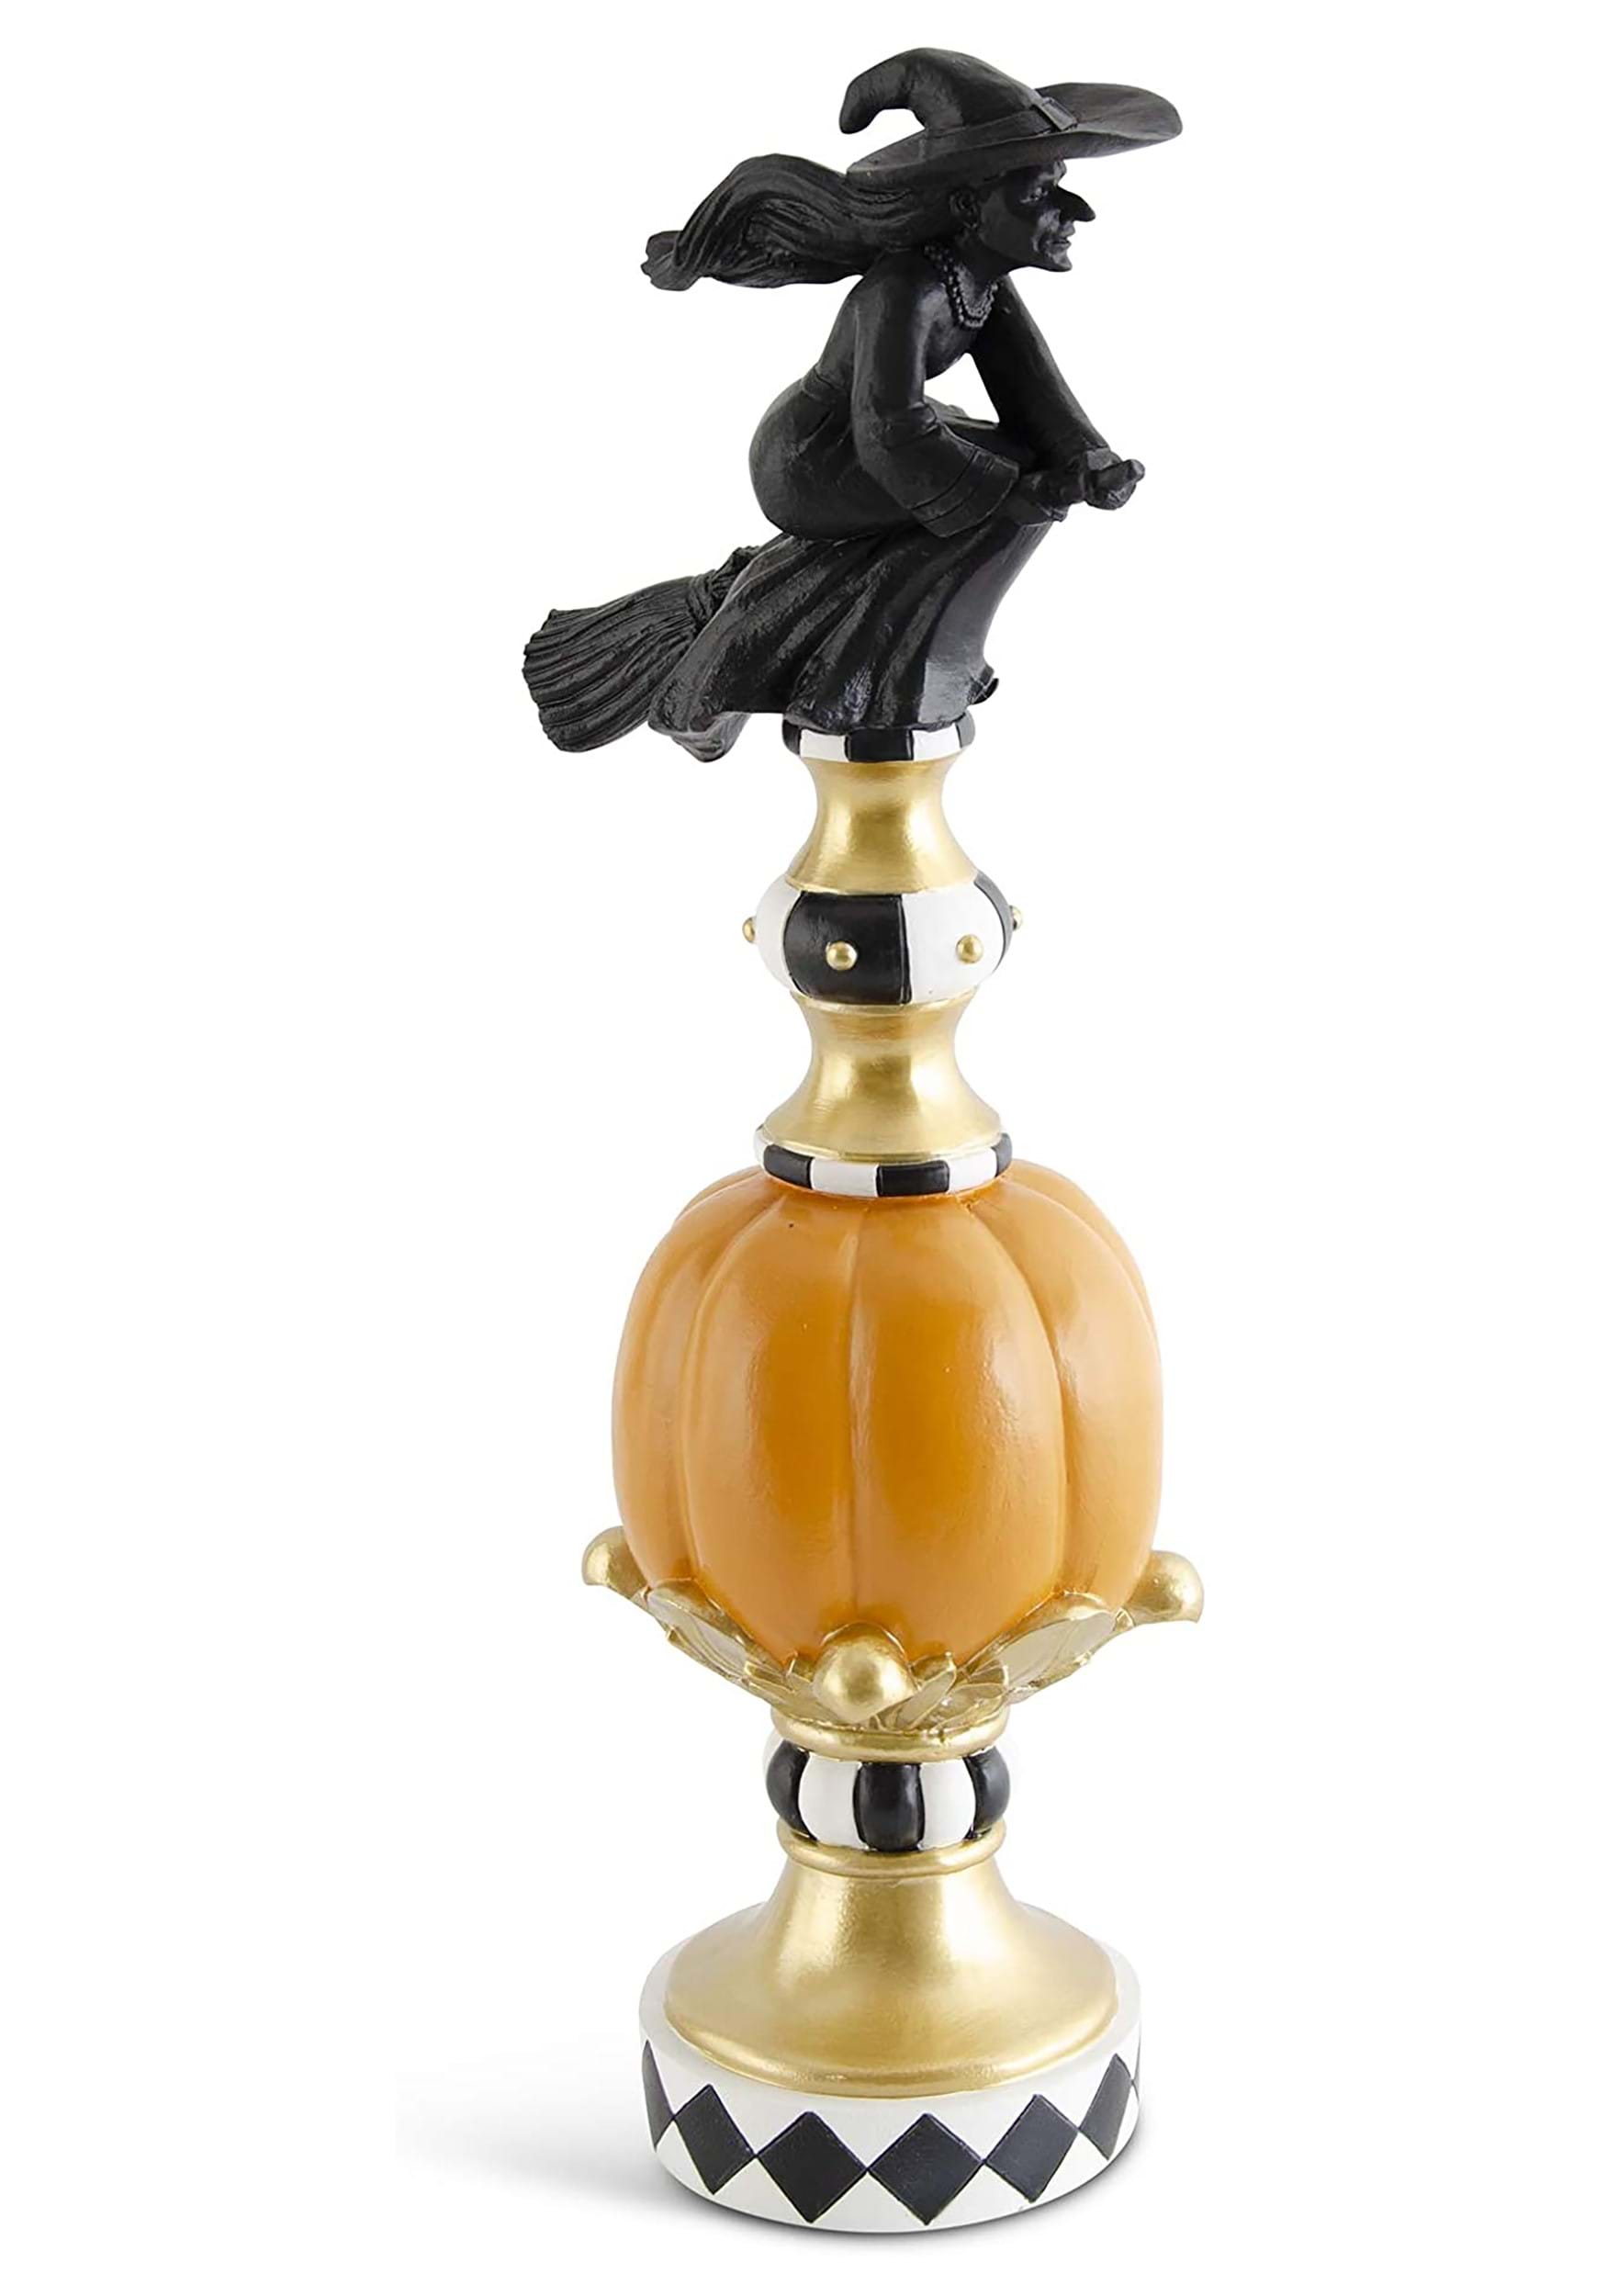 17″ Resin Black White Orange and Gold Finial with Witch Prop